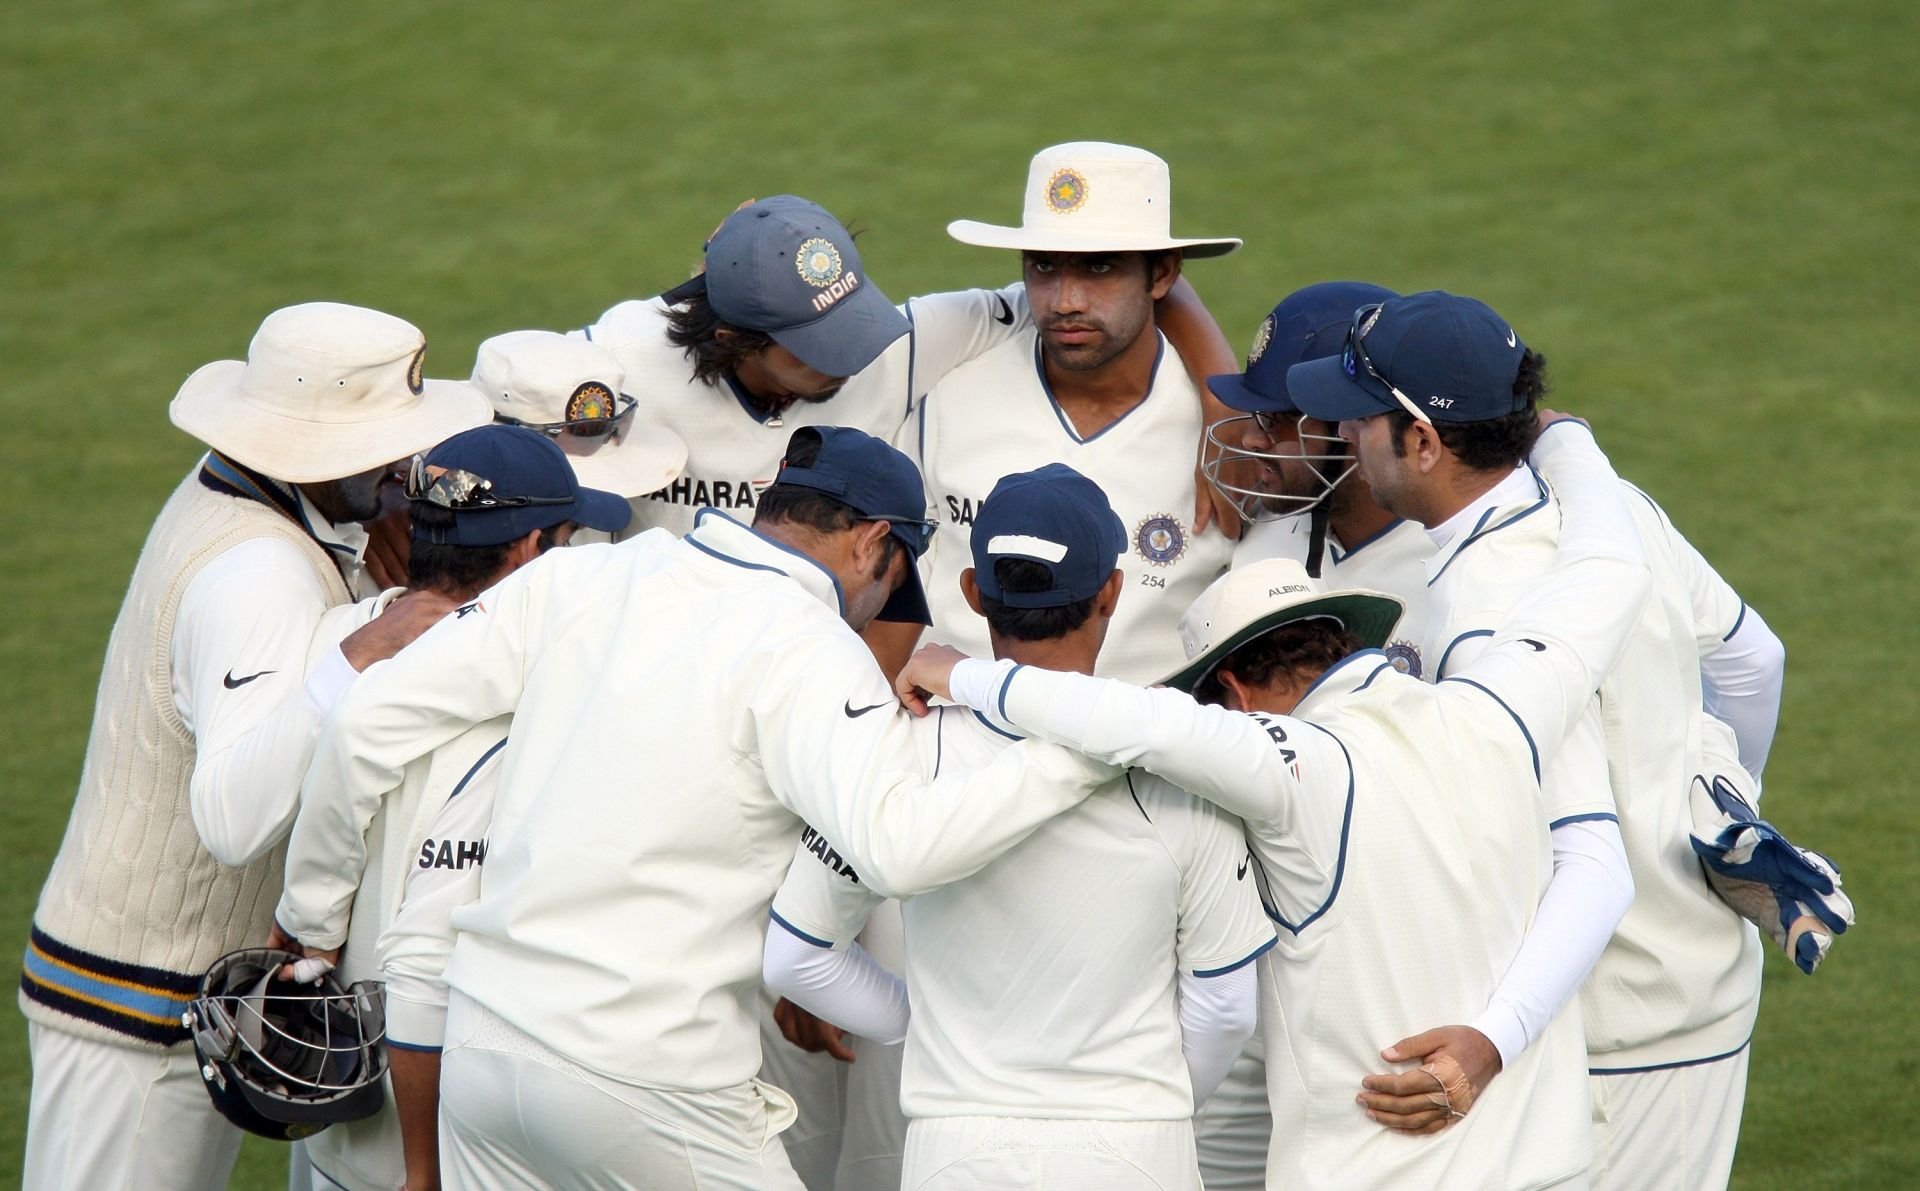 India reached the No.1 Spot in Tests under Gary Kirsten